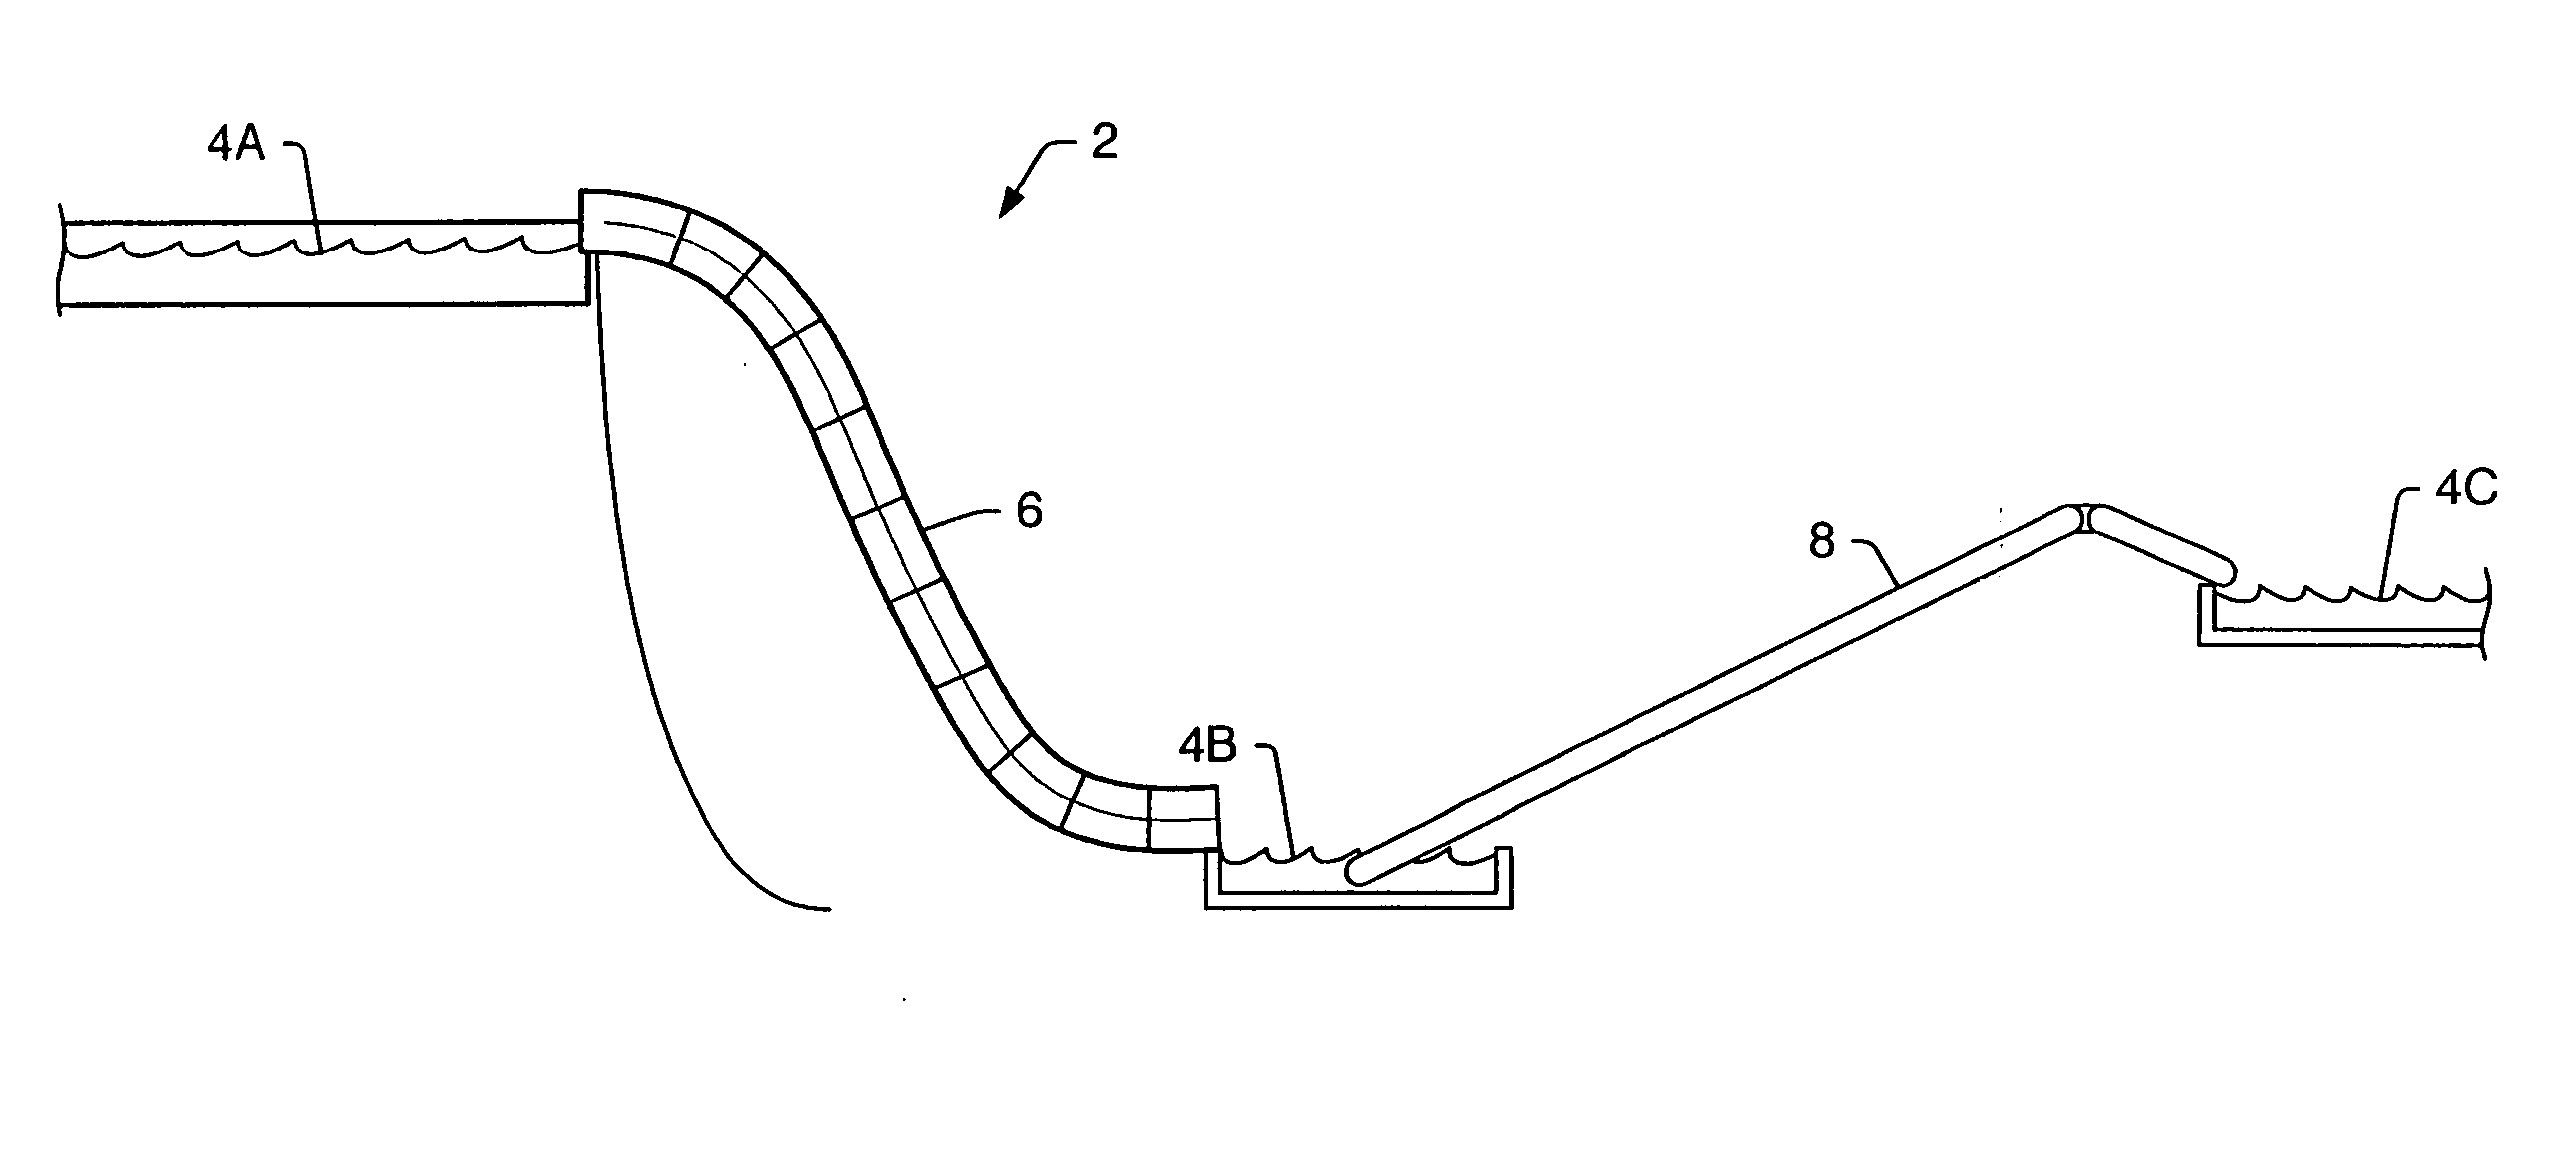 Method and system of positionable screens for water amusement parks